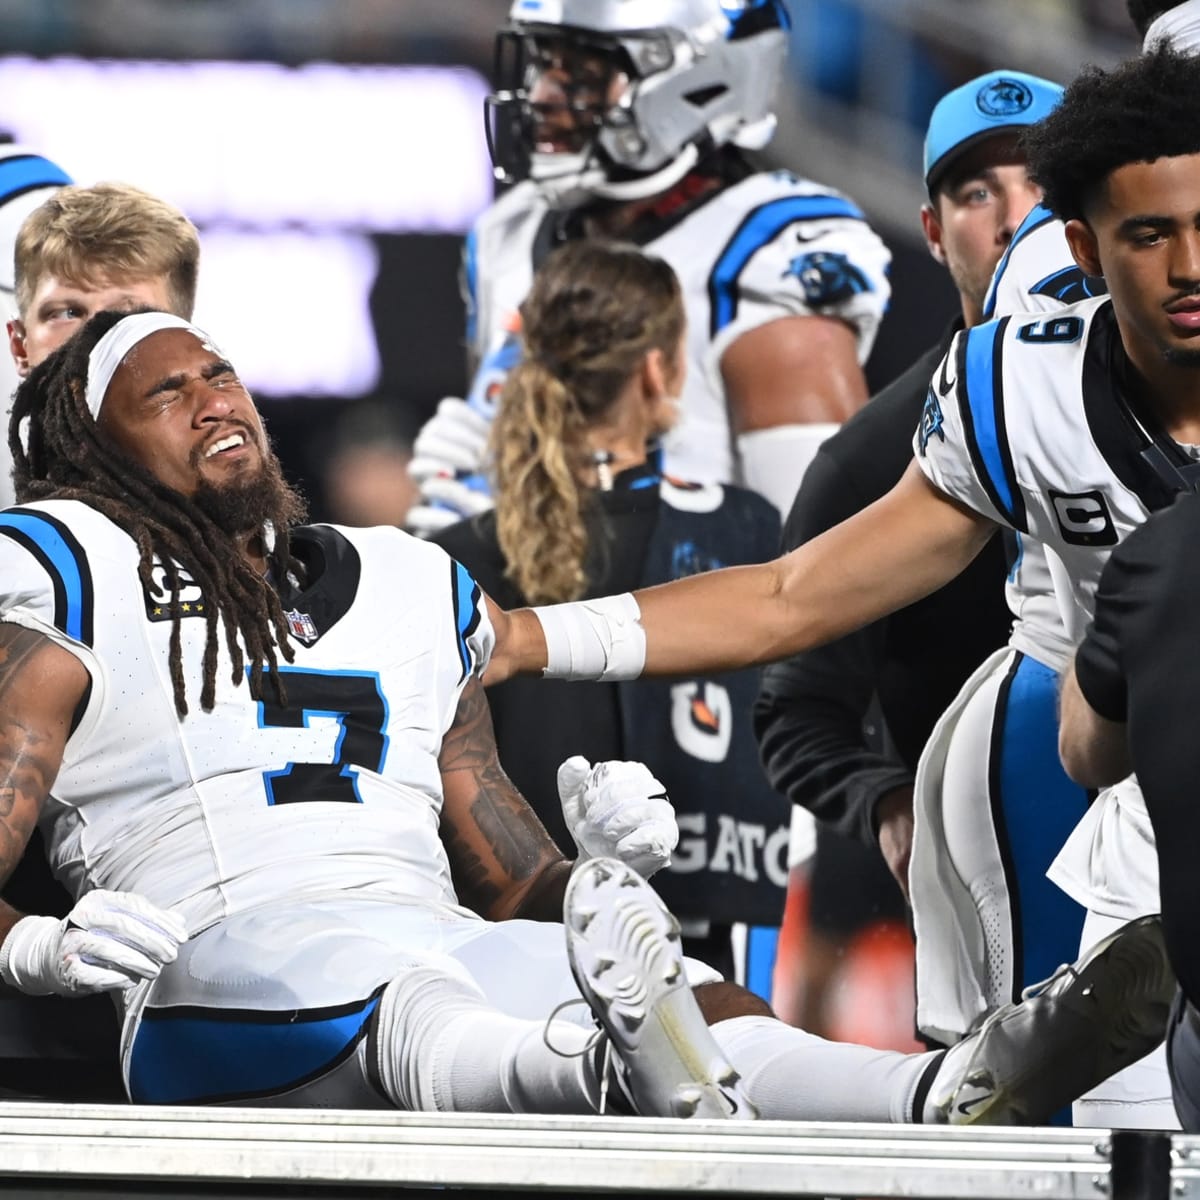 Panthers linebacker Shaq Thompson expected to miss remainder of